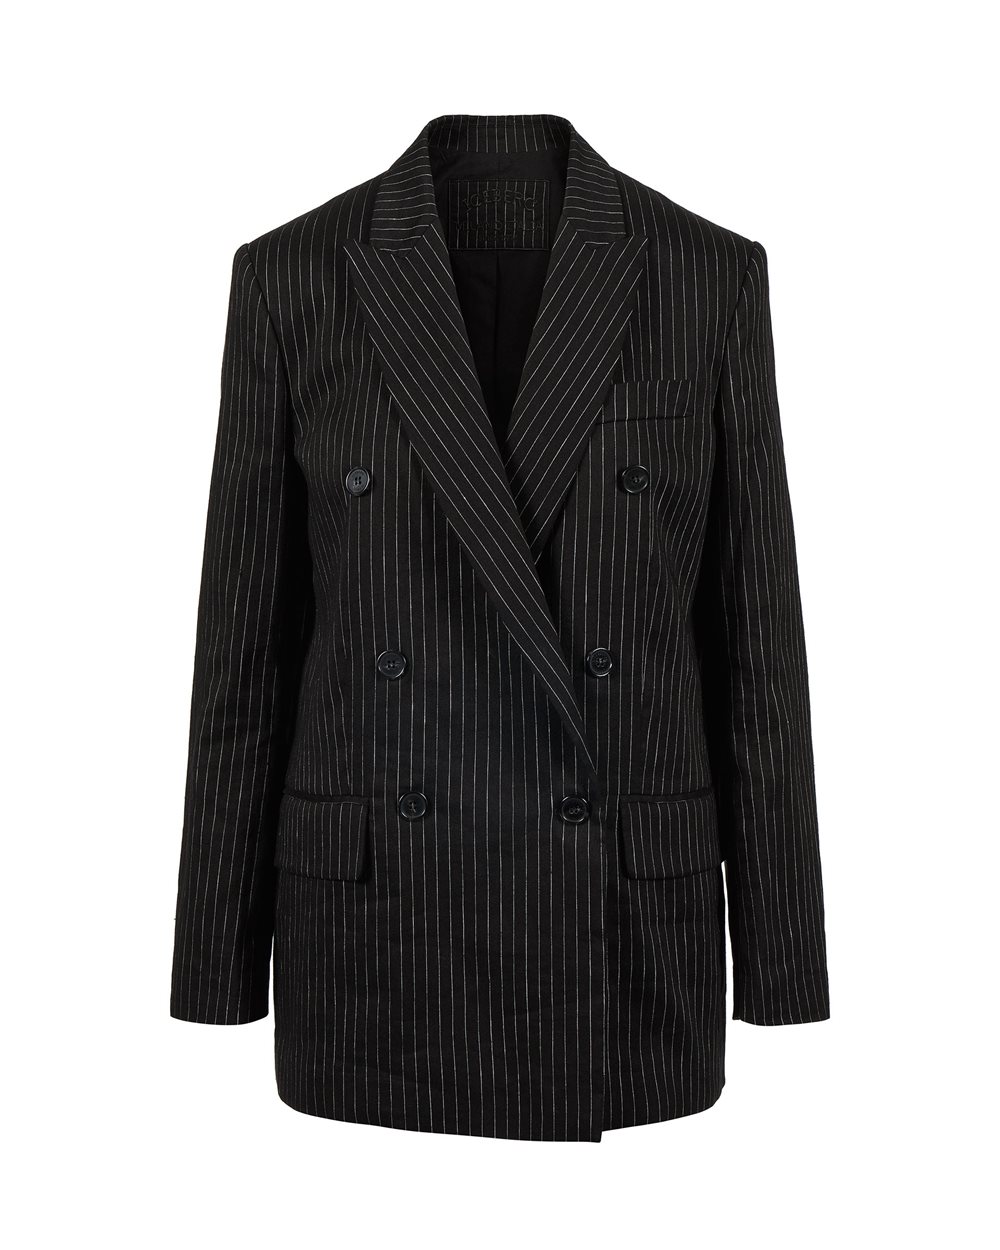 Pinstripe double-breasted jacket | Iceberg - Official Website